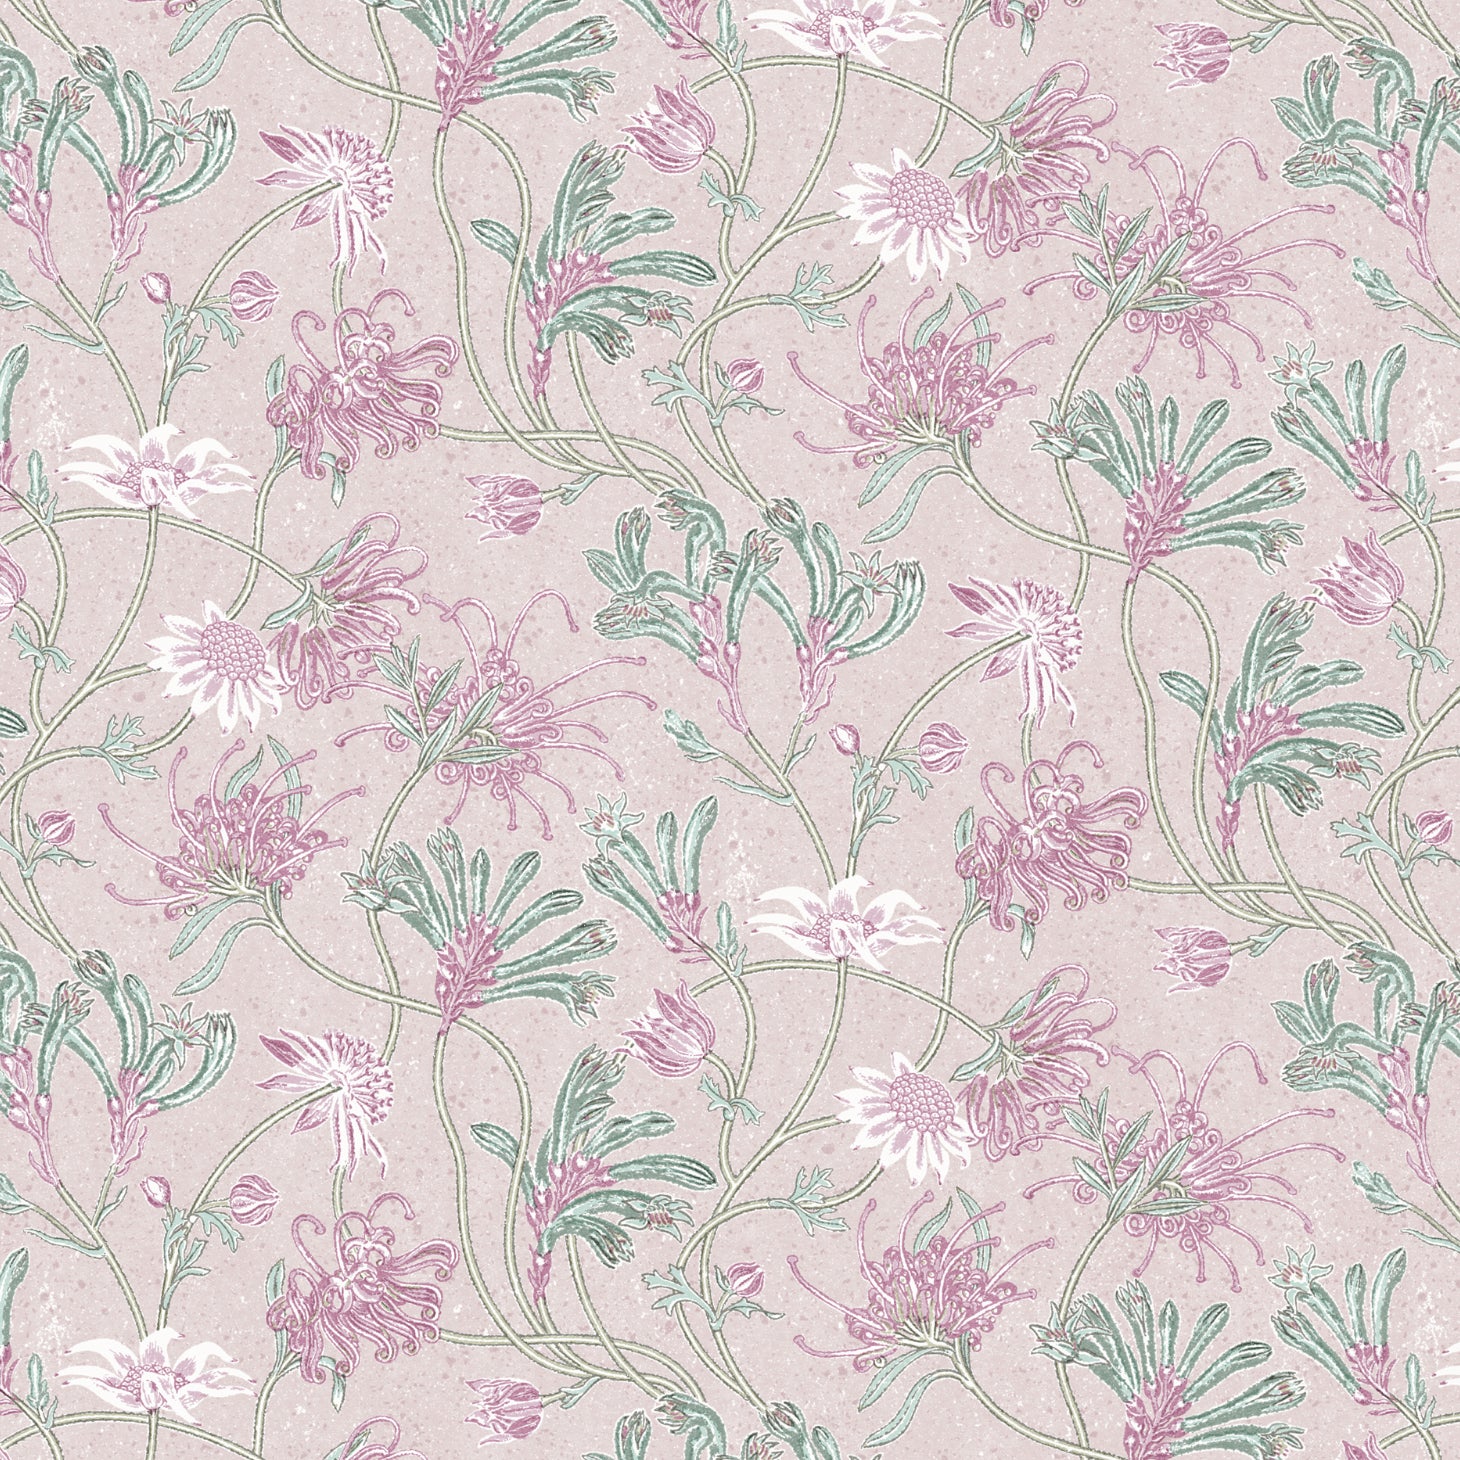 Detail of wallpaper in a painterly floral print in shades of white, pink and green on a mauve field.